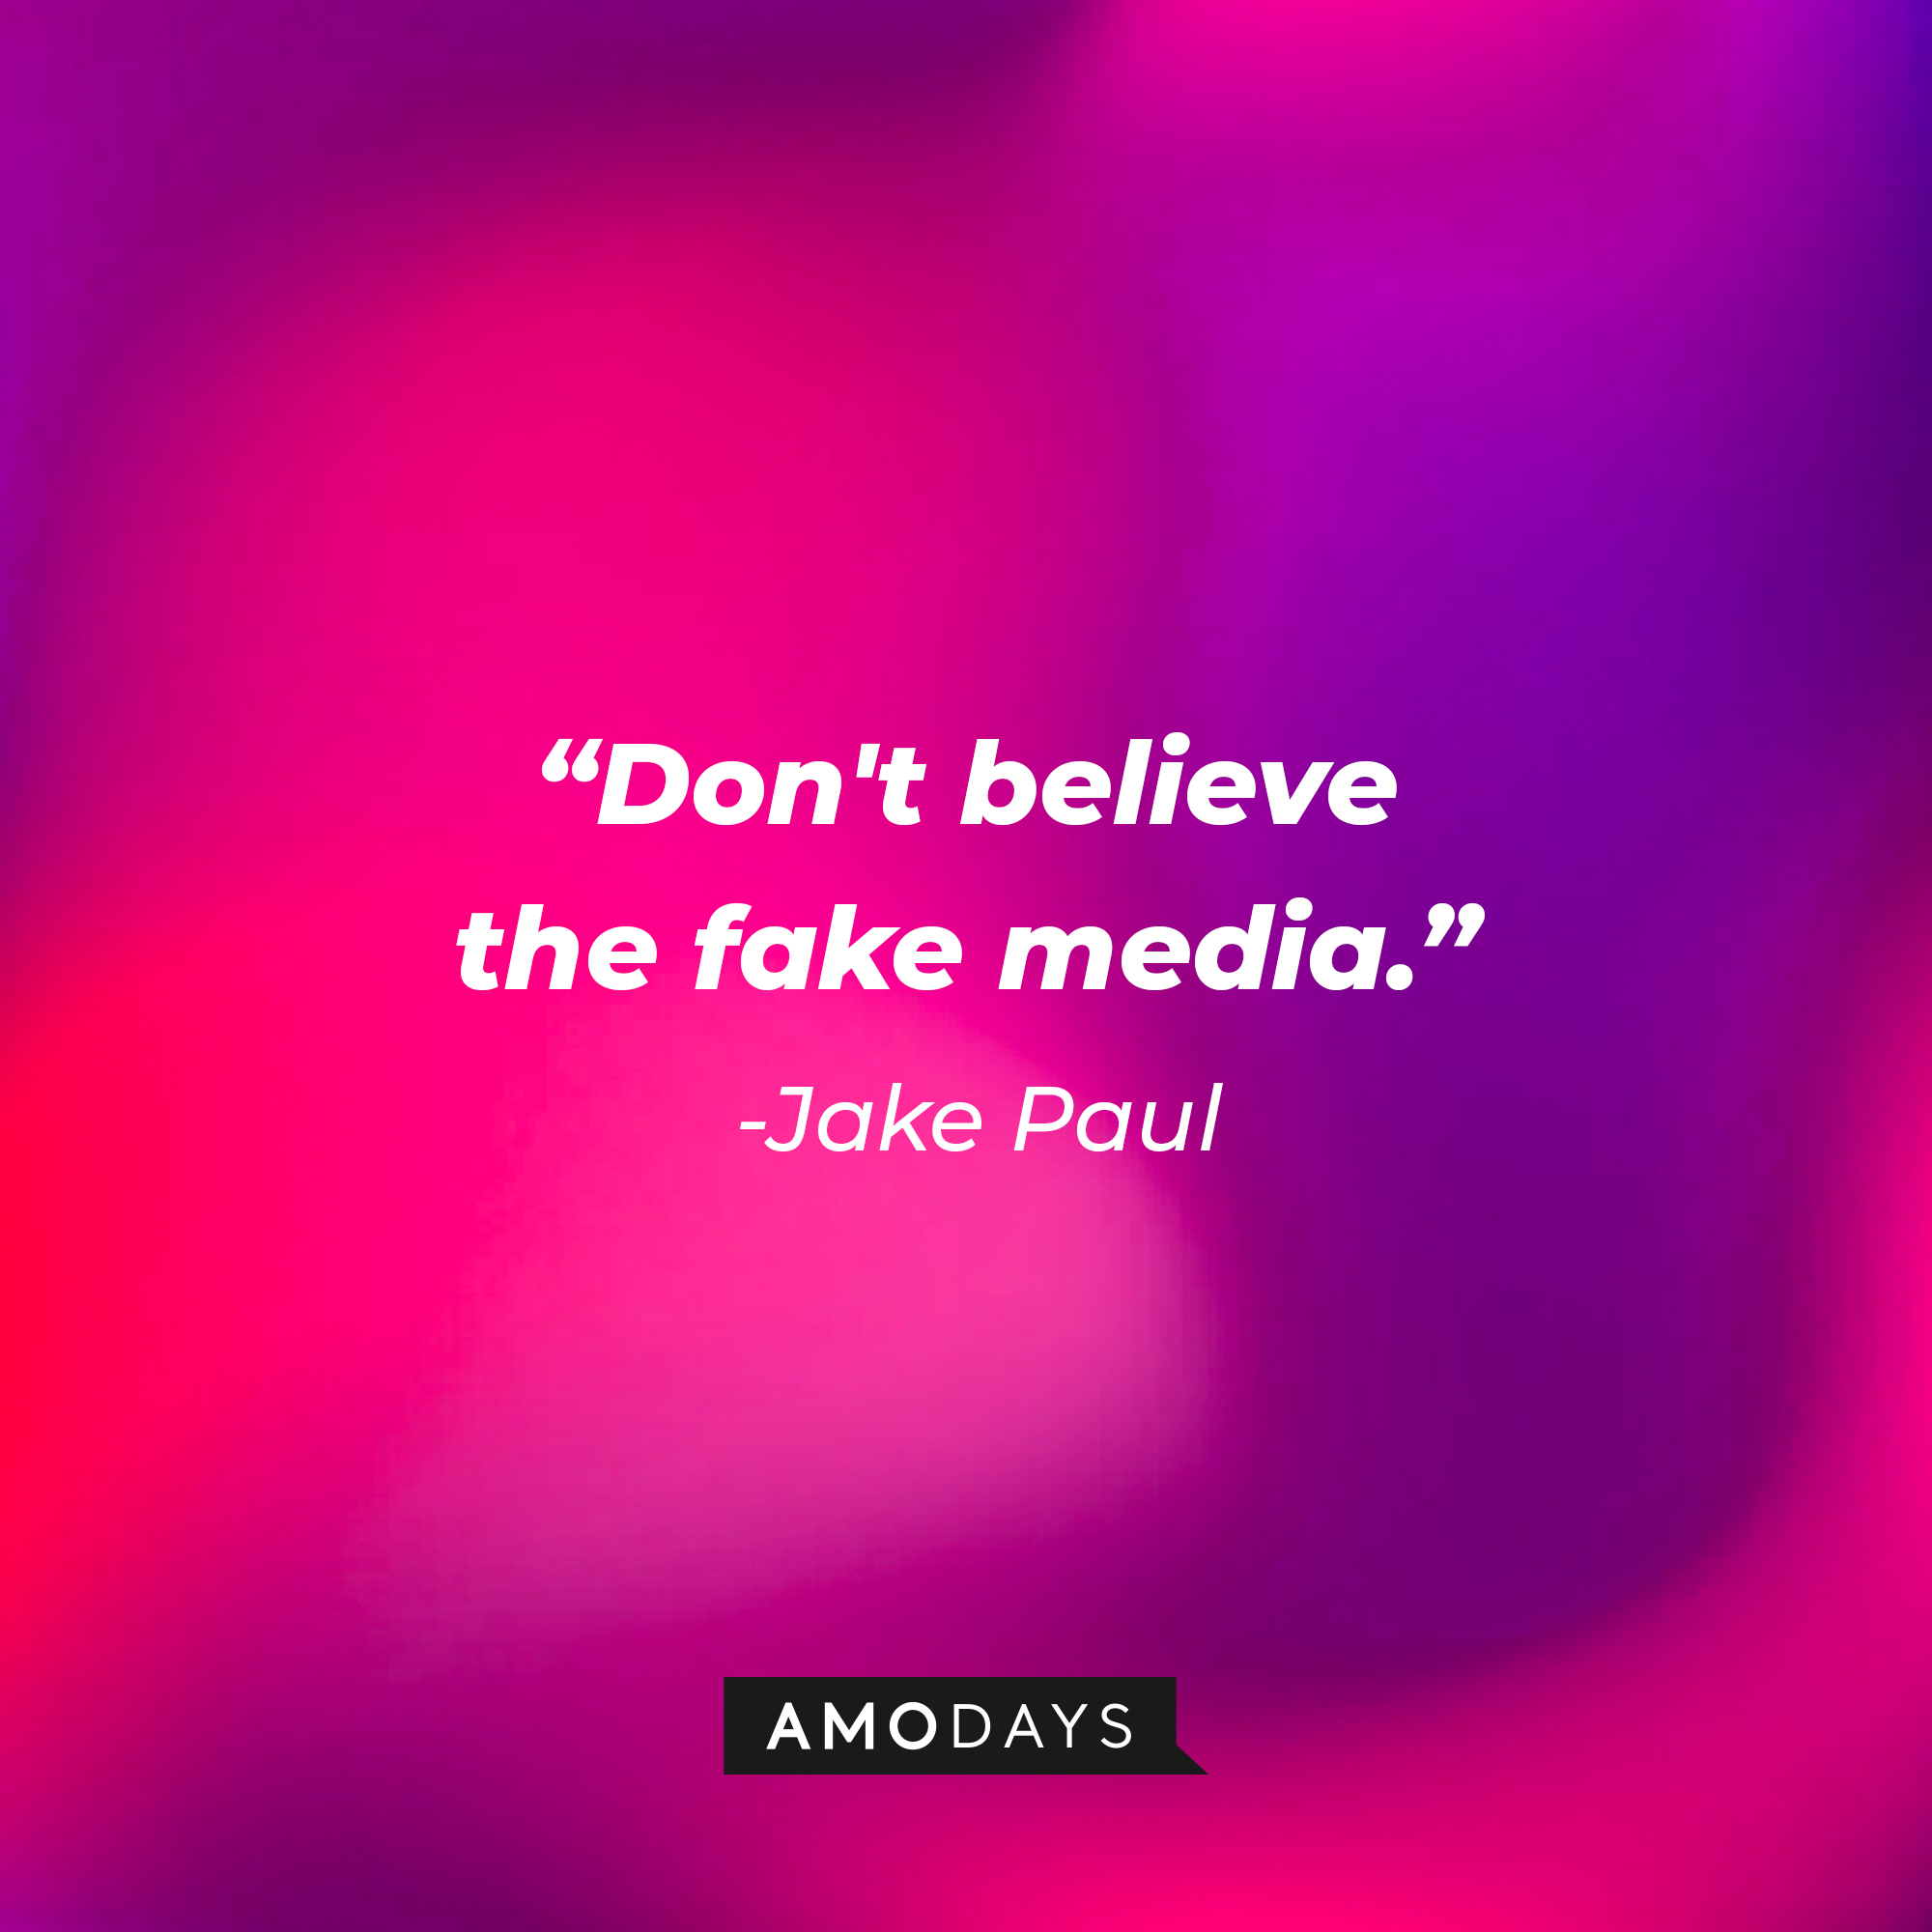 Jake Paul’s quote: “Don't believe the fake media." | Image: Amodays